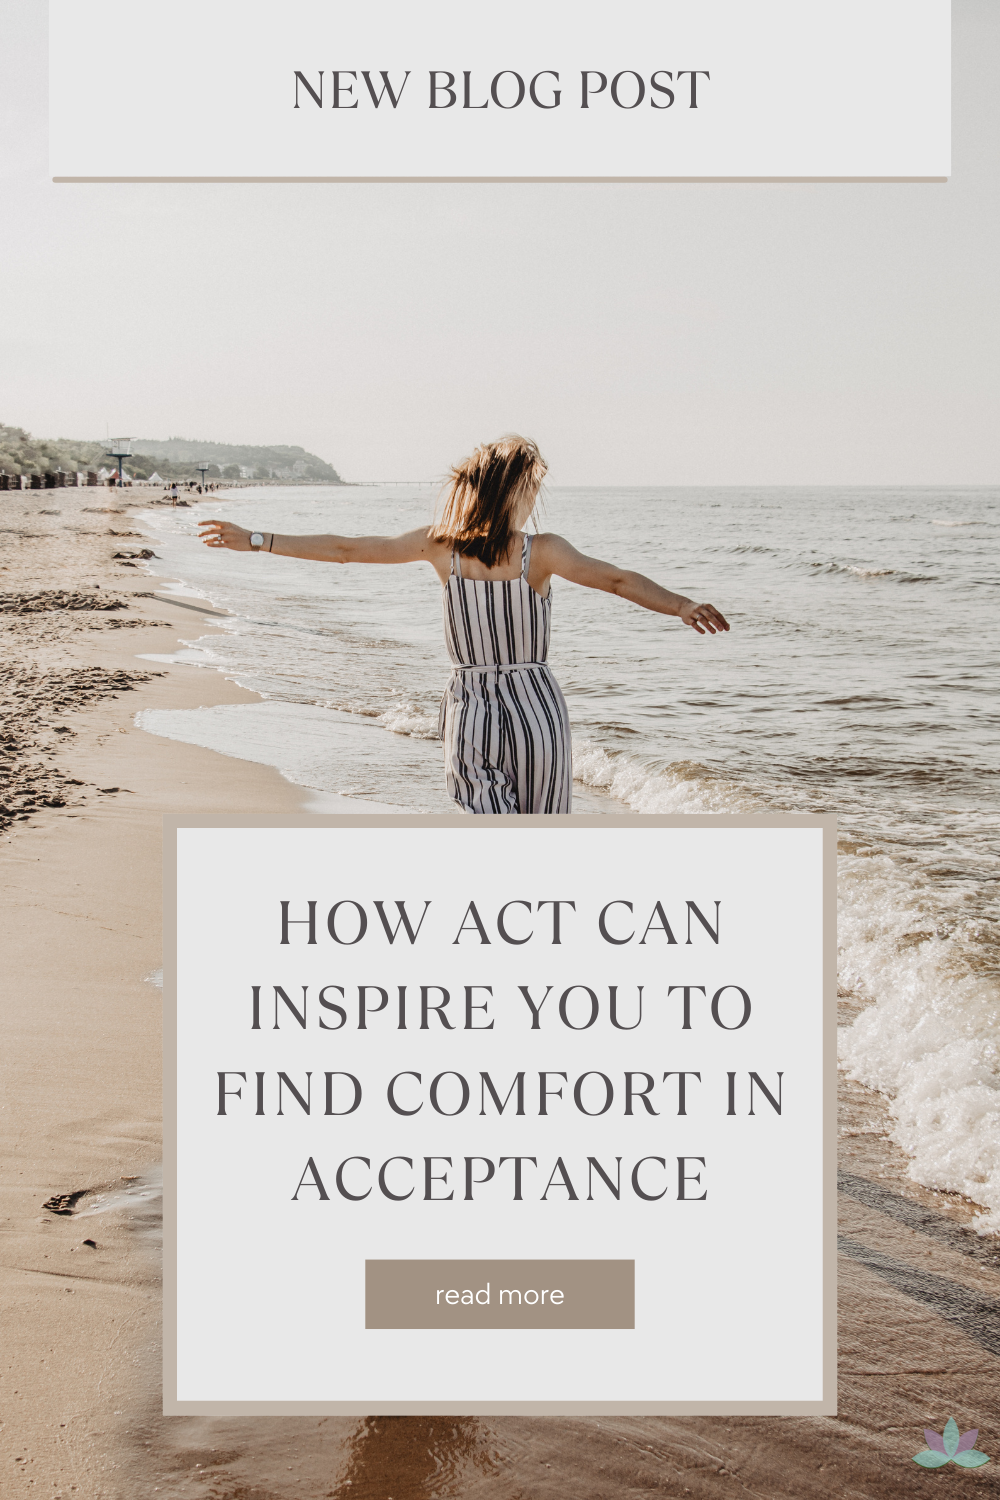 How ACT Can Inspire You to Find Comfort in Acceptance